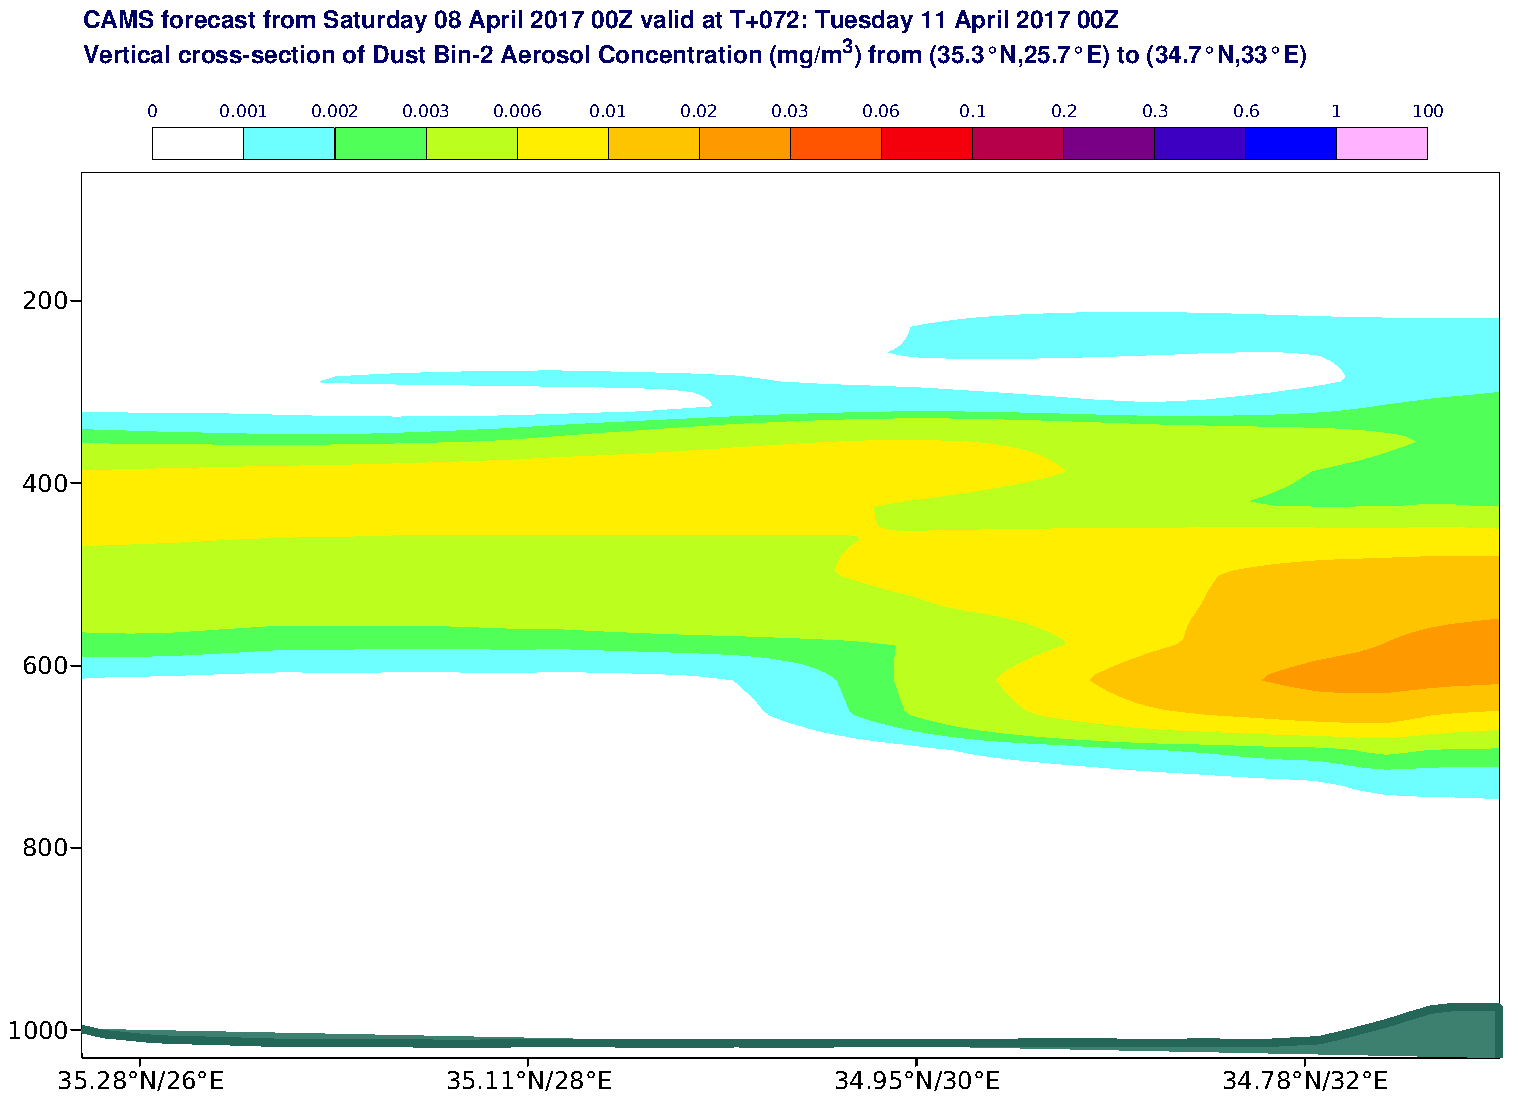 Vertical cross-section of Dust Bin-2 Aerosol Concentration (mg/m3) valid at T72 - 2017-04-11 00:00